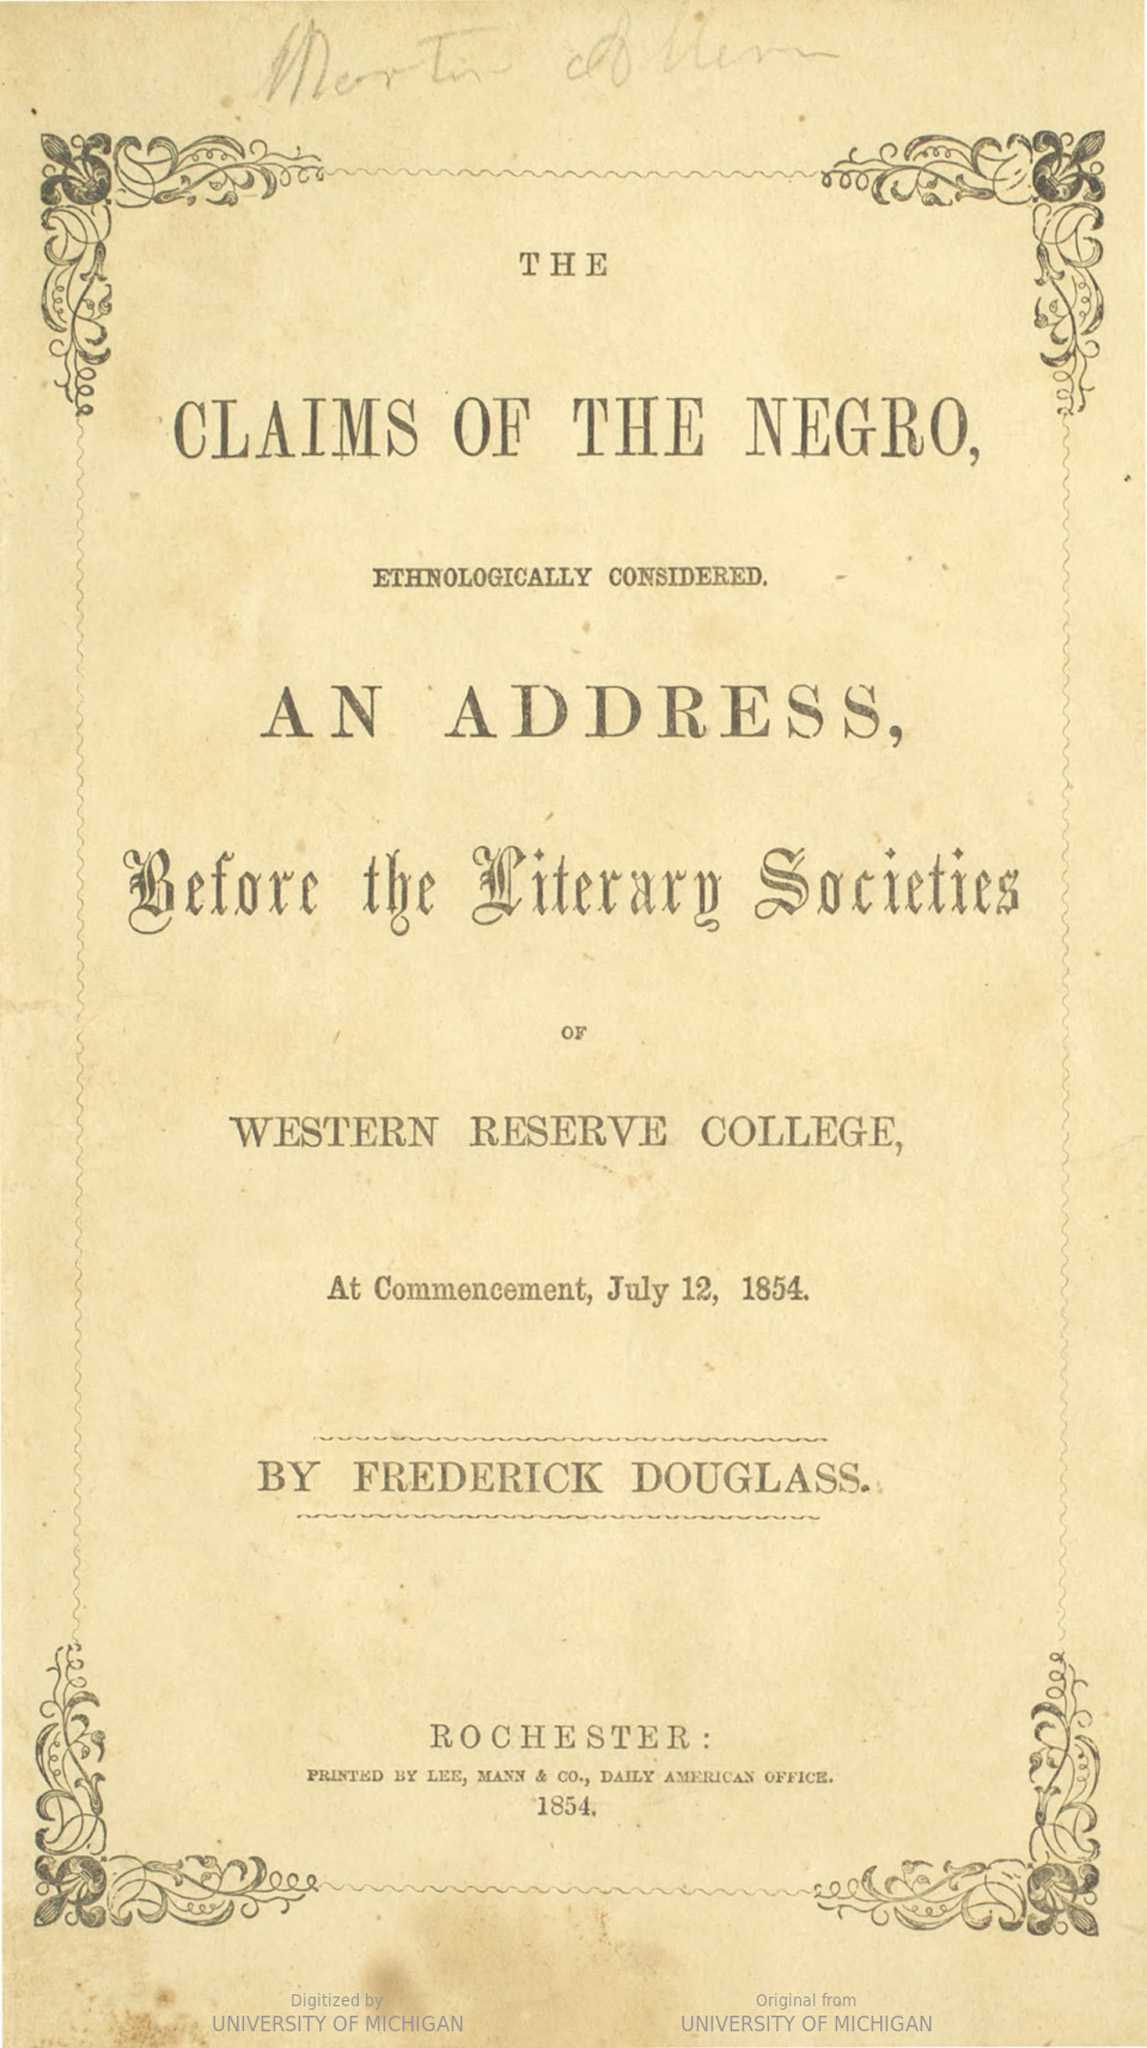 Image of 1854 address, “The Claims of the Negro Ethnologically Considered,” by Frederick Douglass